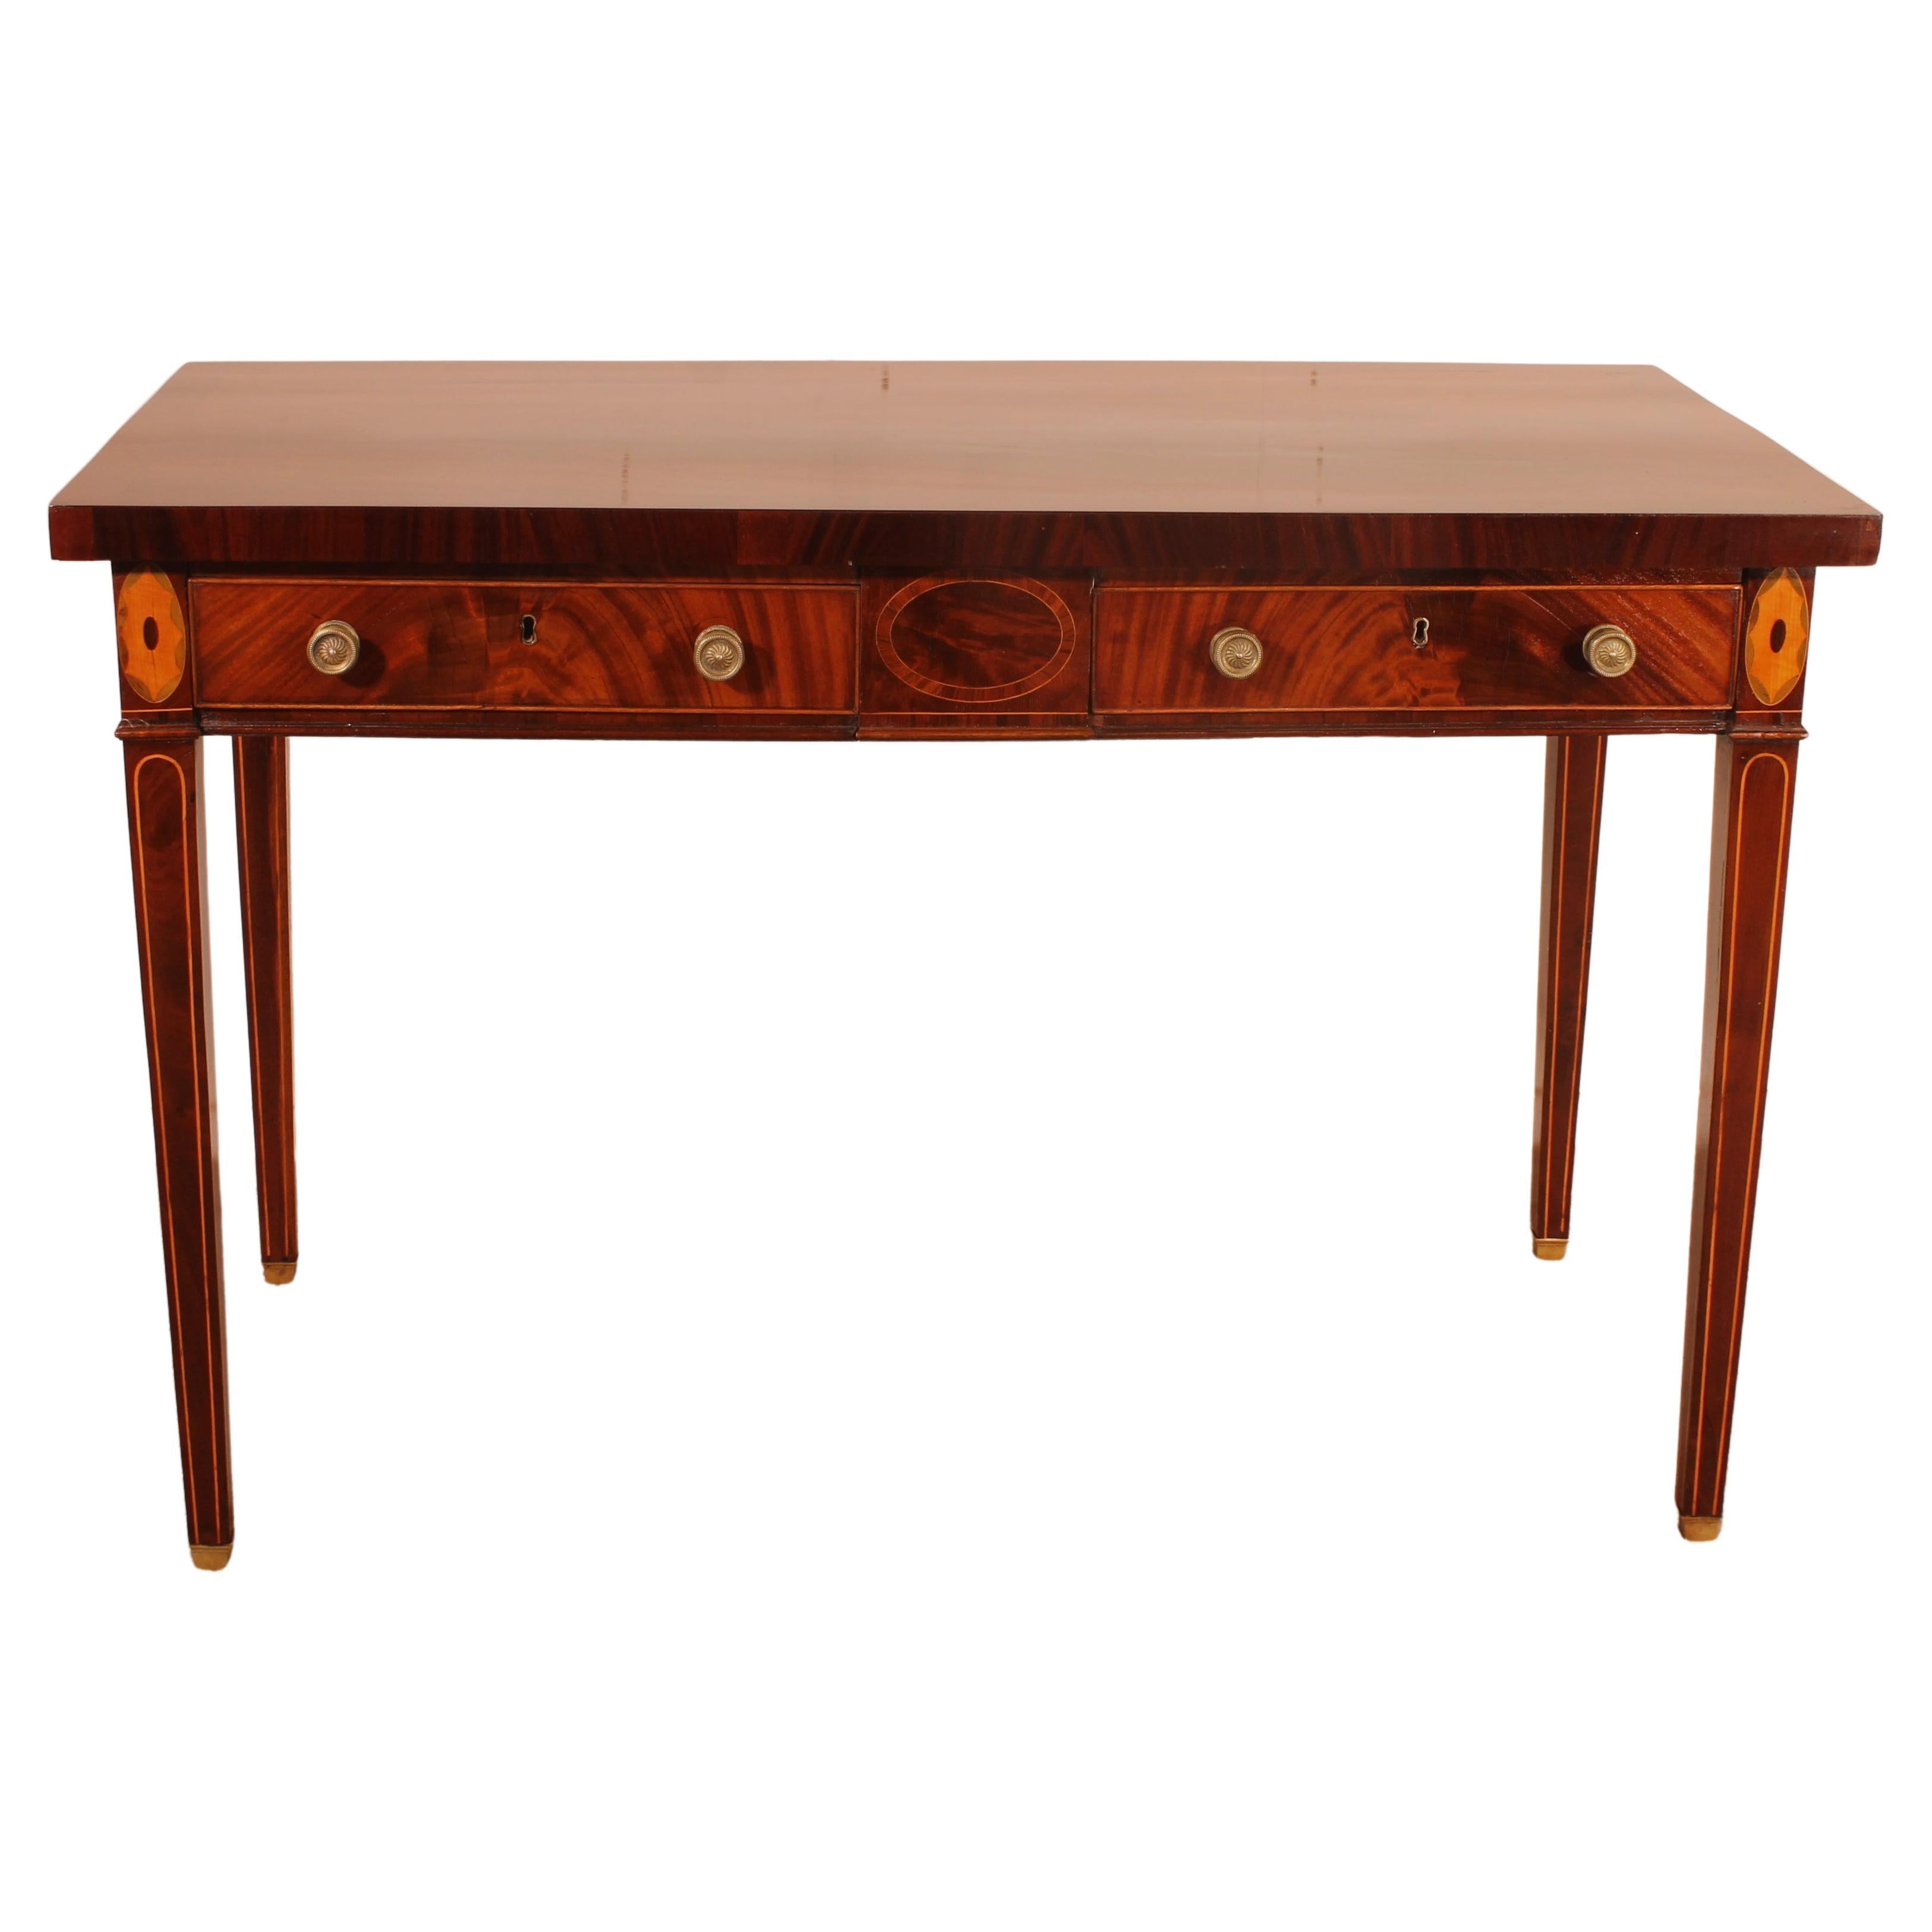 18th Century Desk in Mahogany and Marquetry--Georgian Period